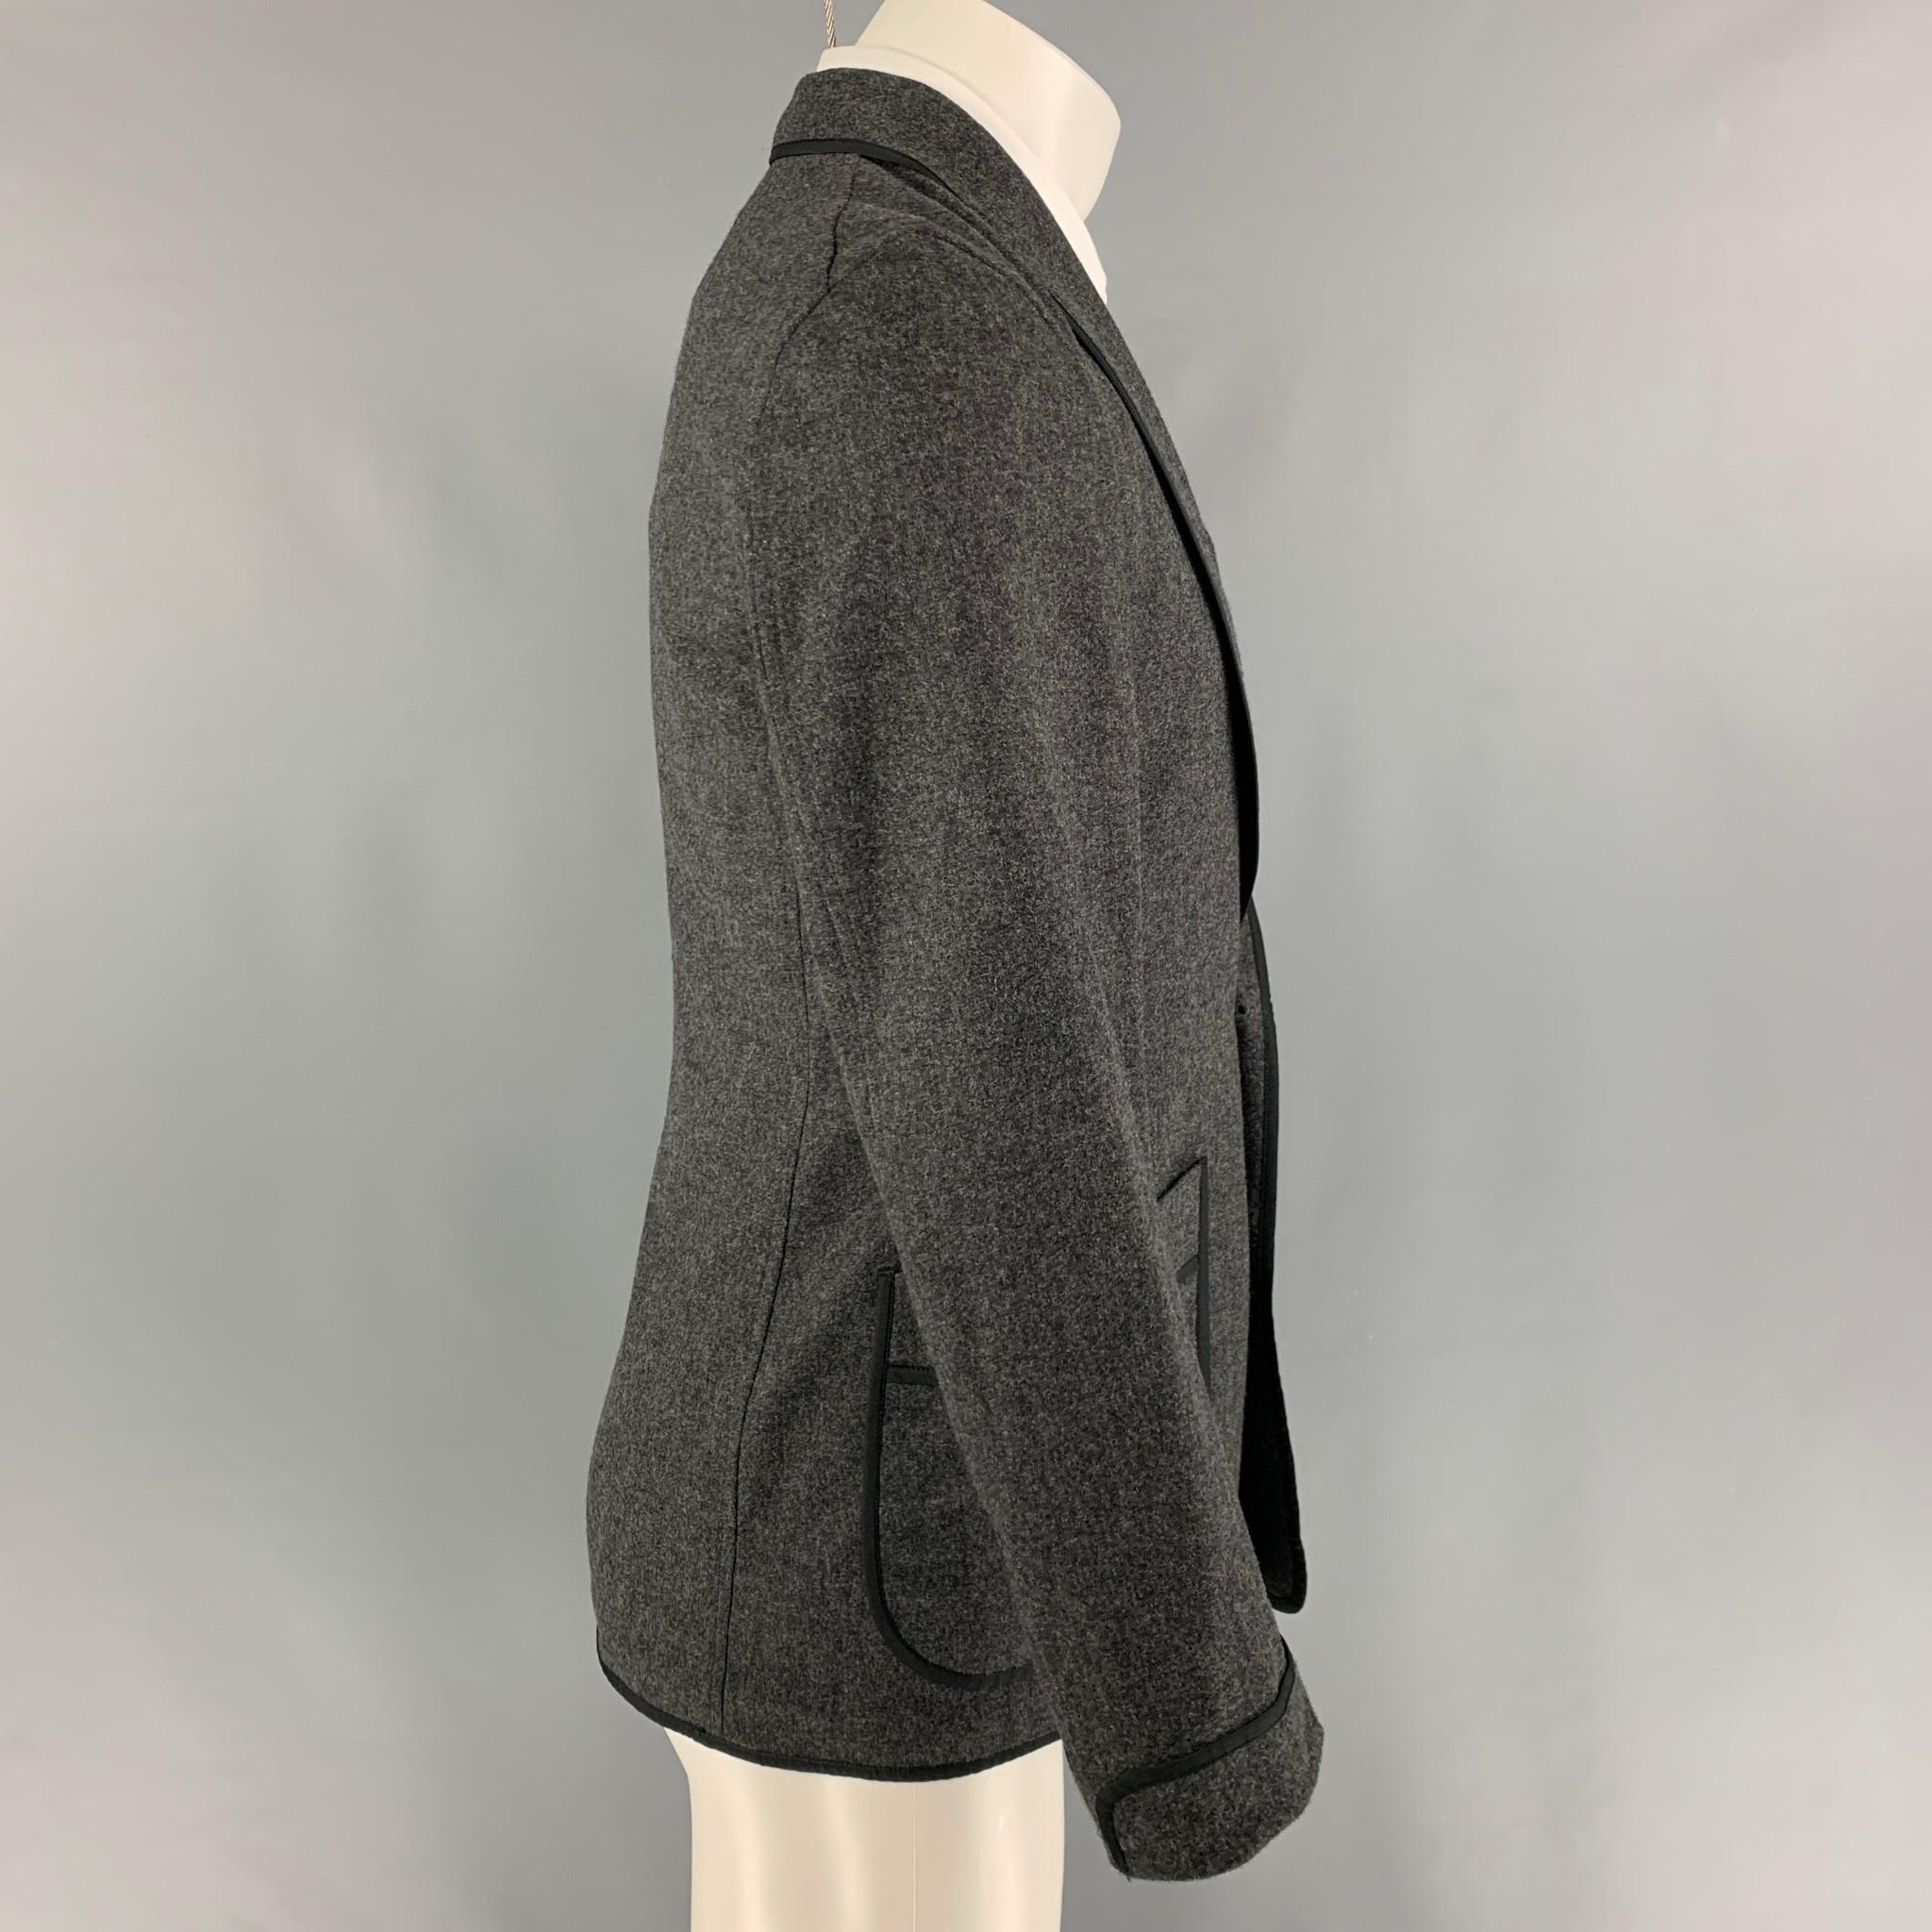 CAMOSHITA by UNITED ARROWS sport coat comes in a grey heather material featuring a shawl collar, patch pockets, and a double breasted closure. Made in Japan. 

Very Good Pre-Owned Condition.
Marked: 44
Original Retail Price: